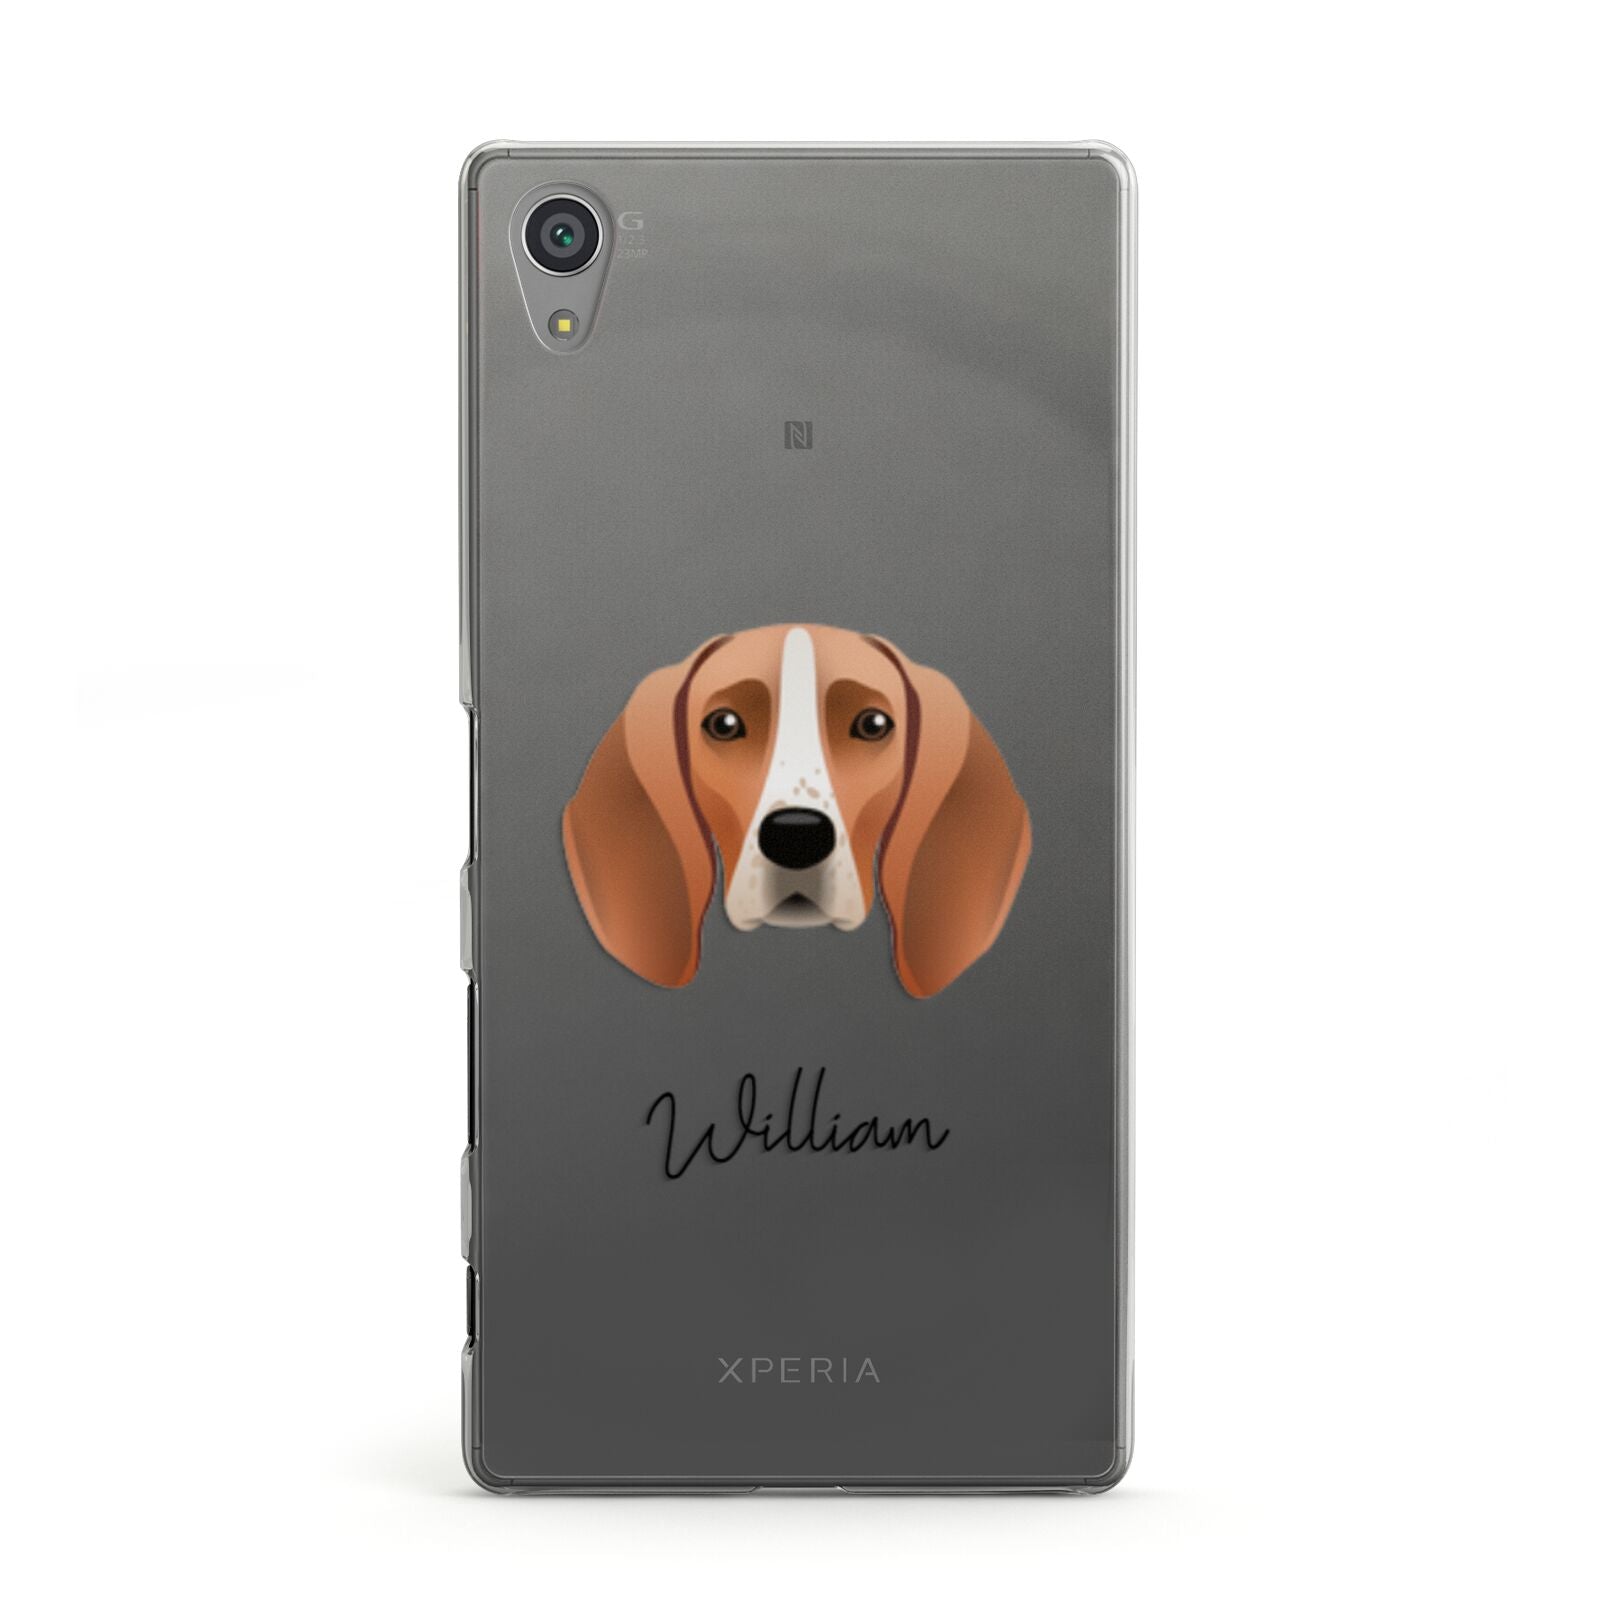 Foxhound Personalised Sony Xperia Case